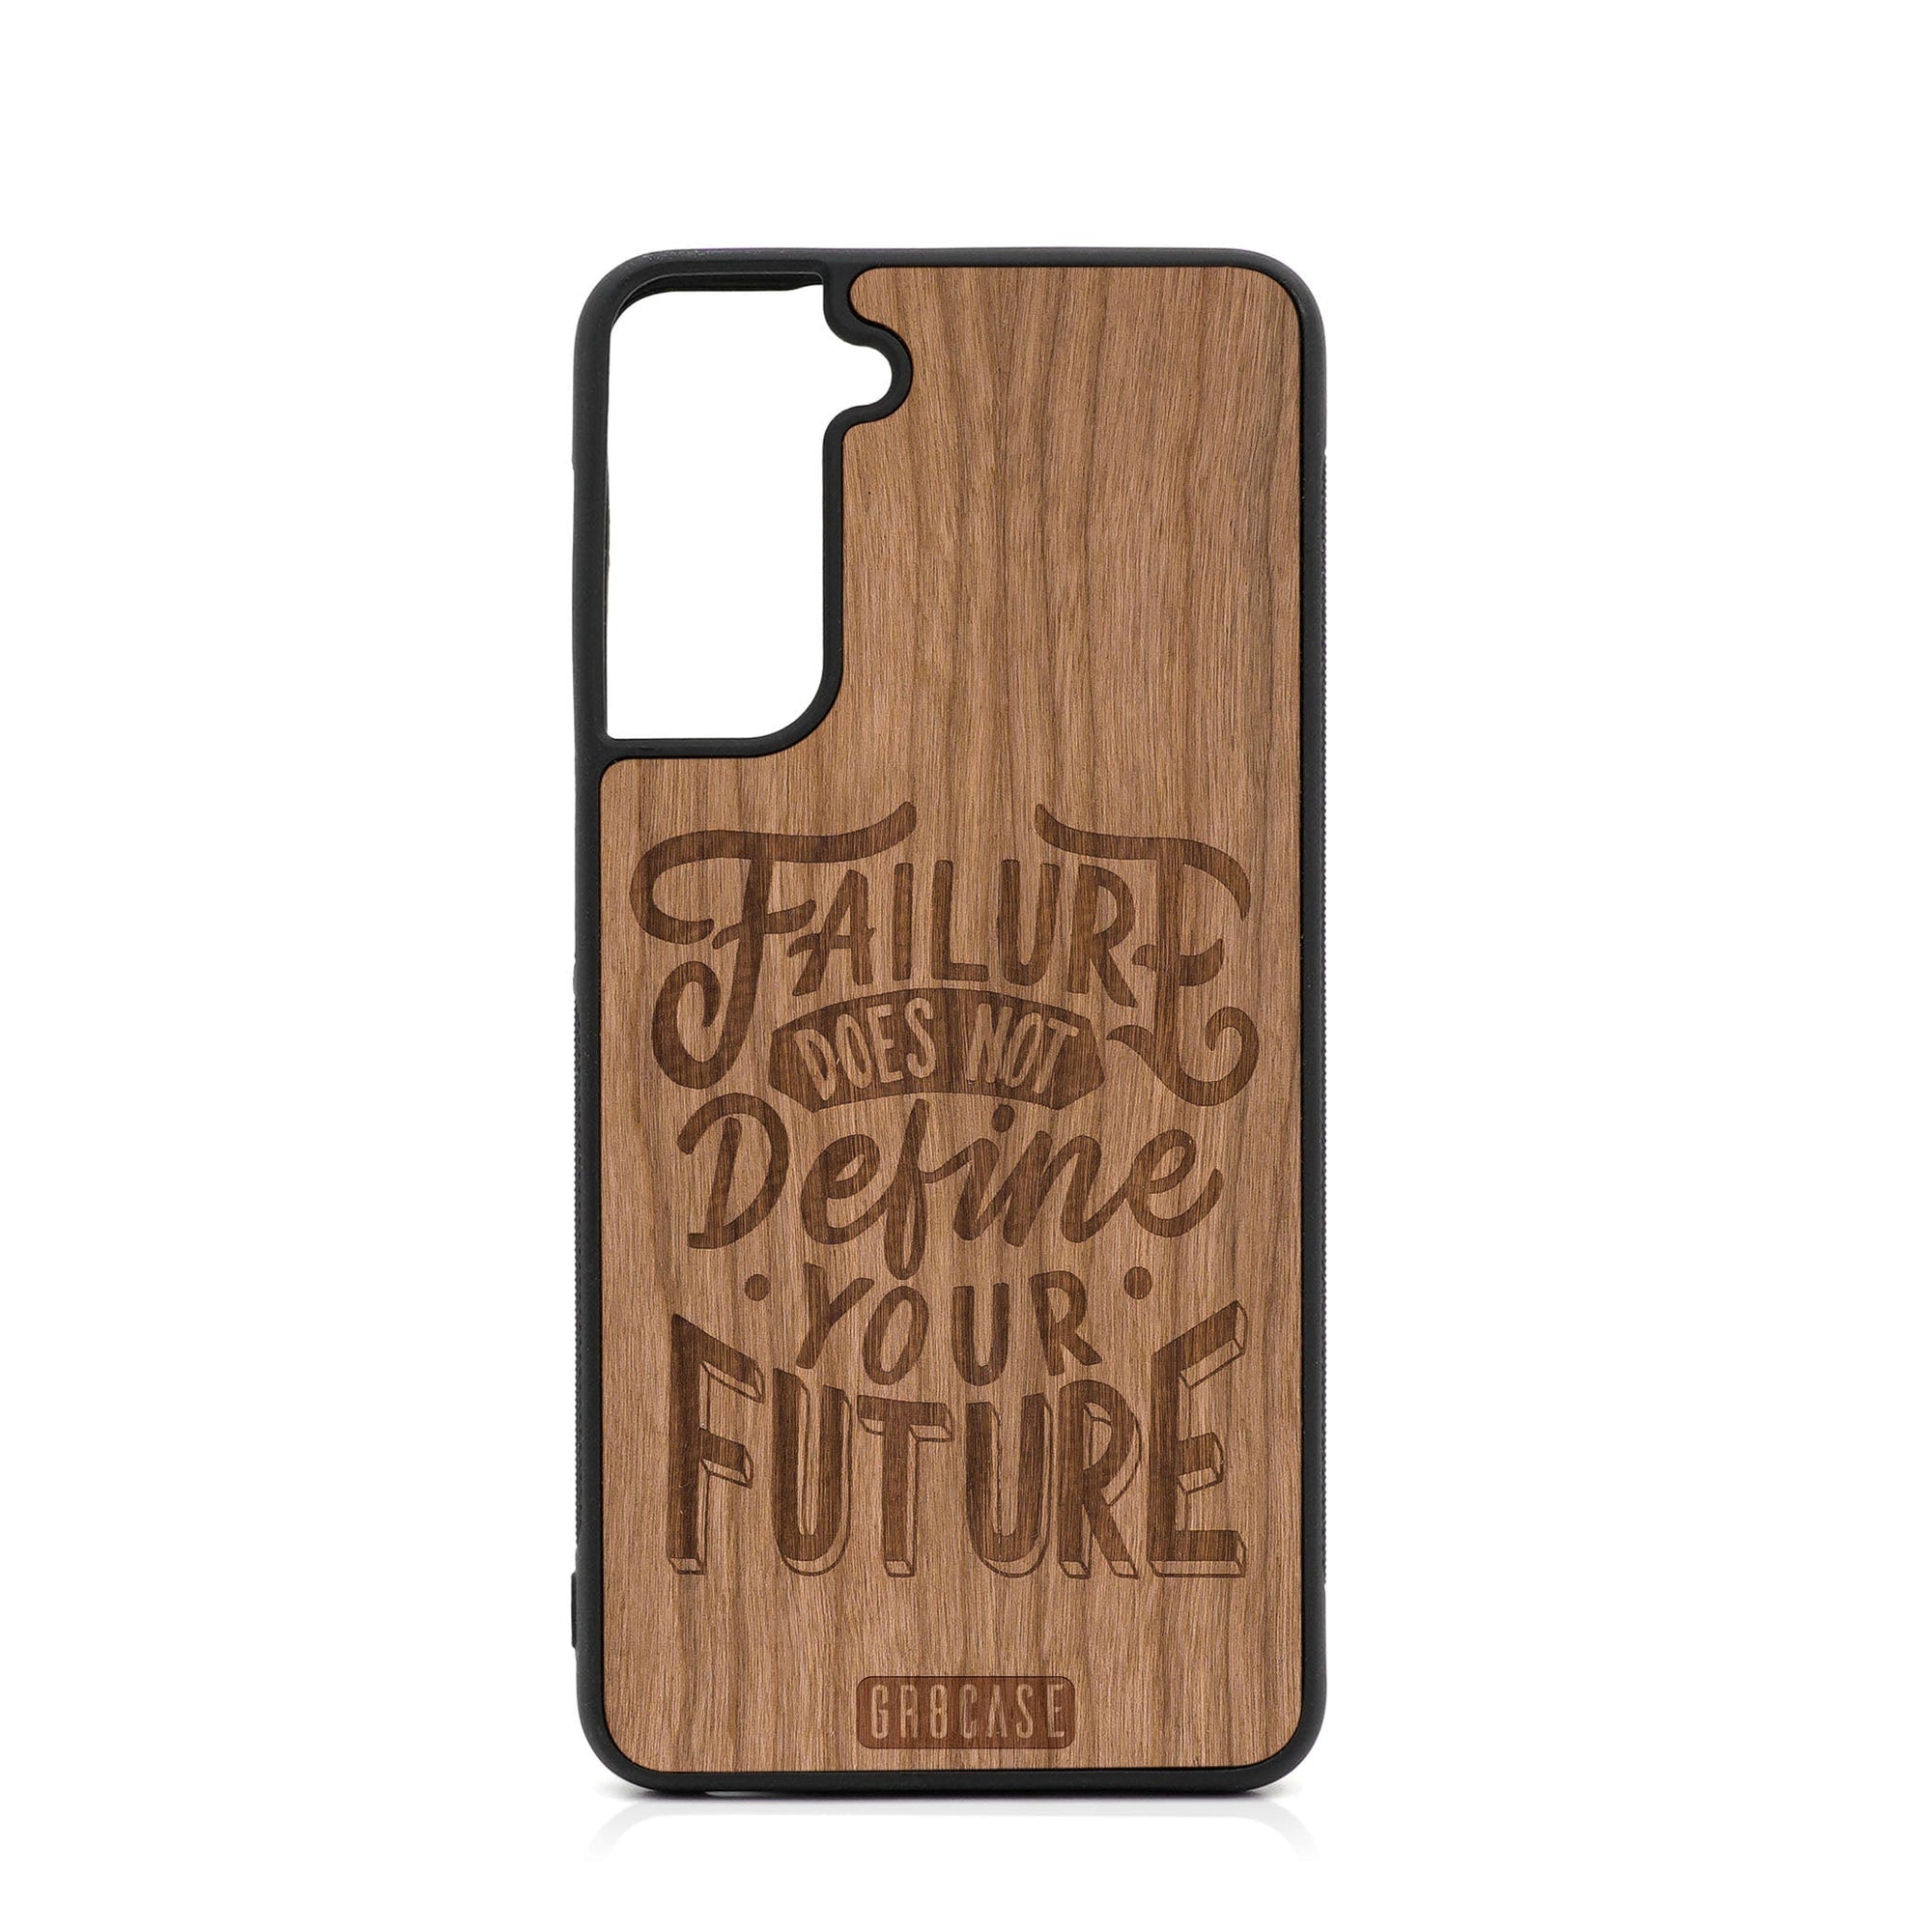 Failure Does Not Define Your Future Design Wood Case For Samsung Galaxy S21 FE 5G